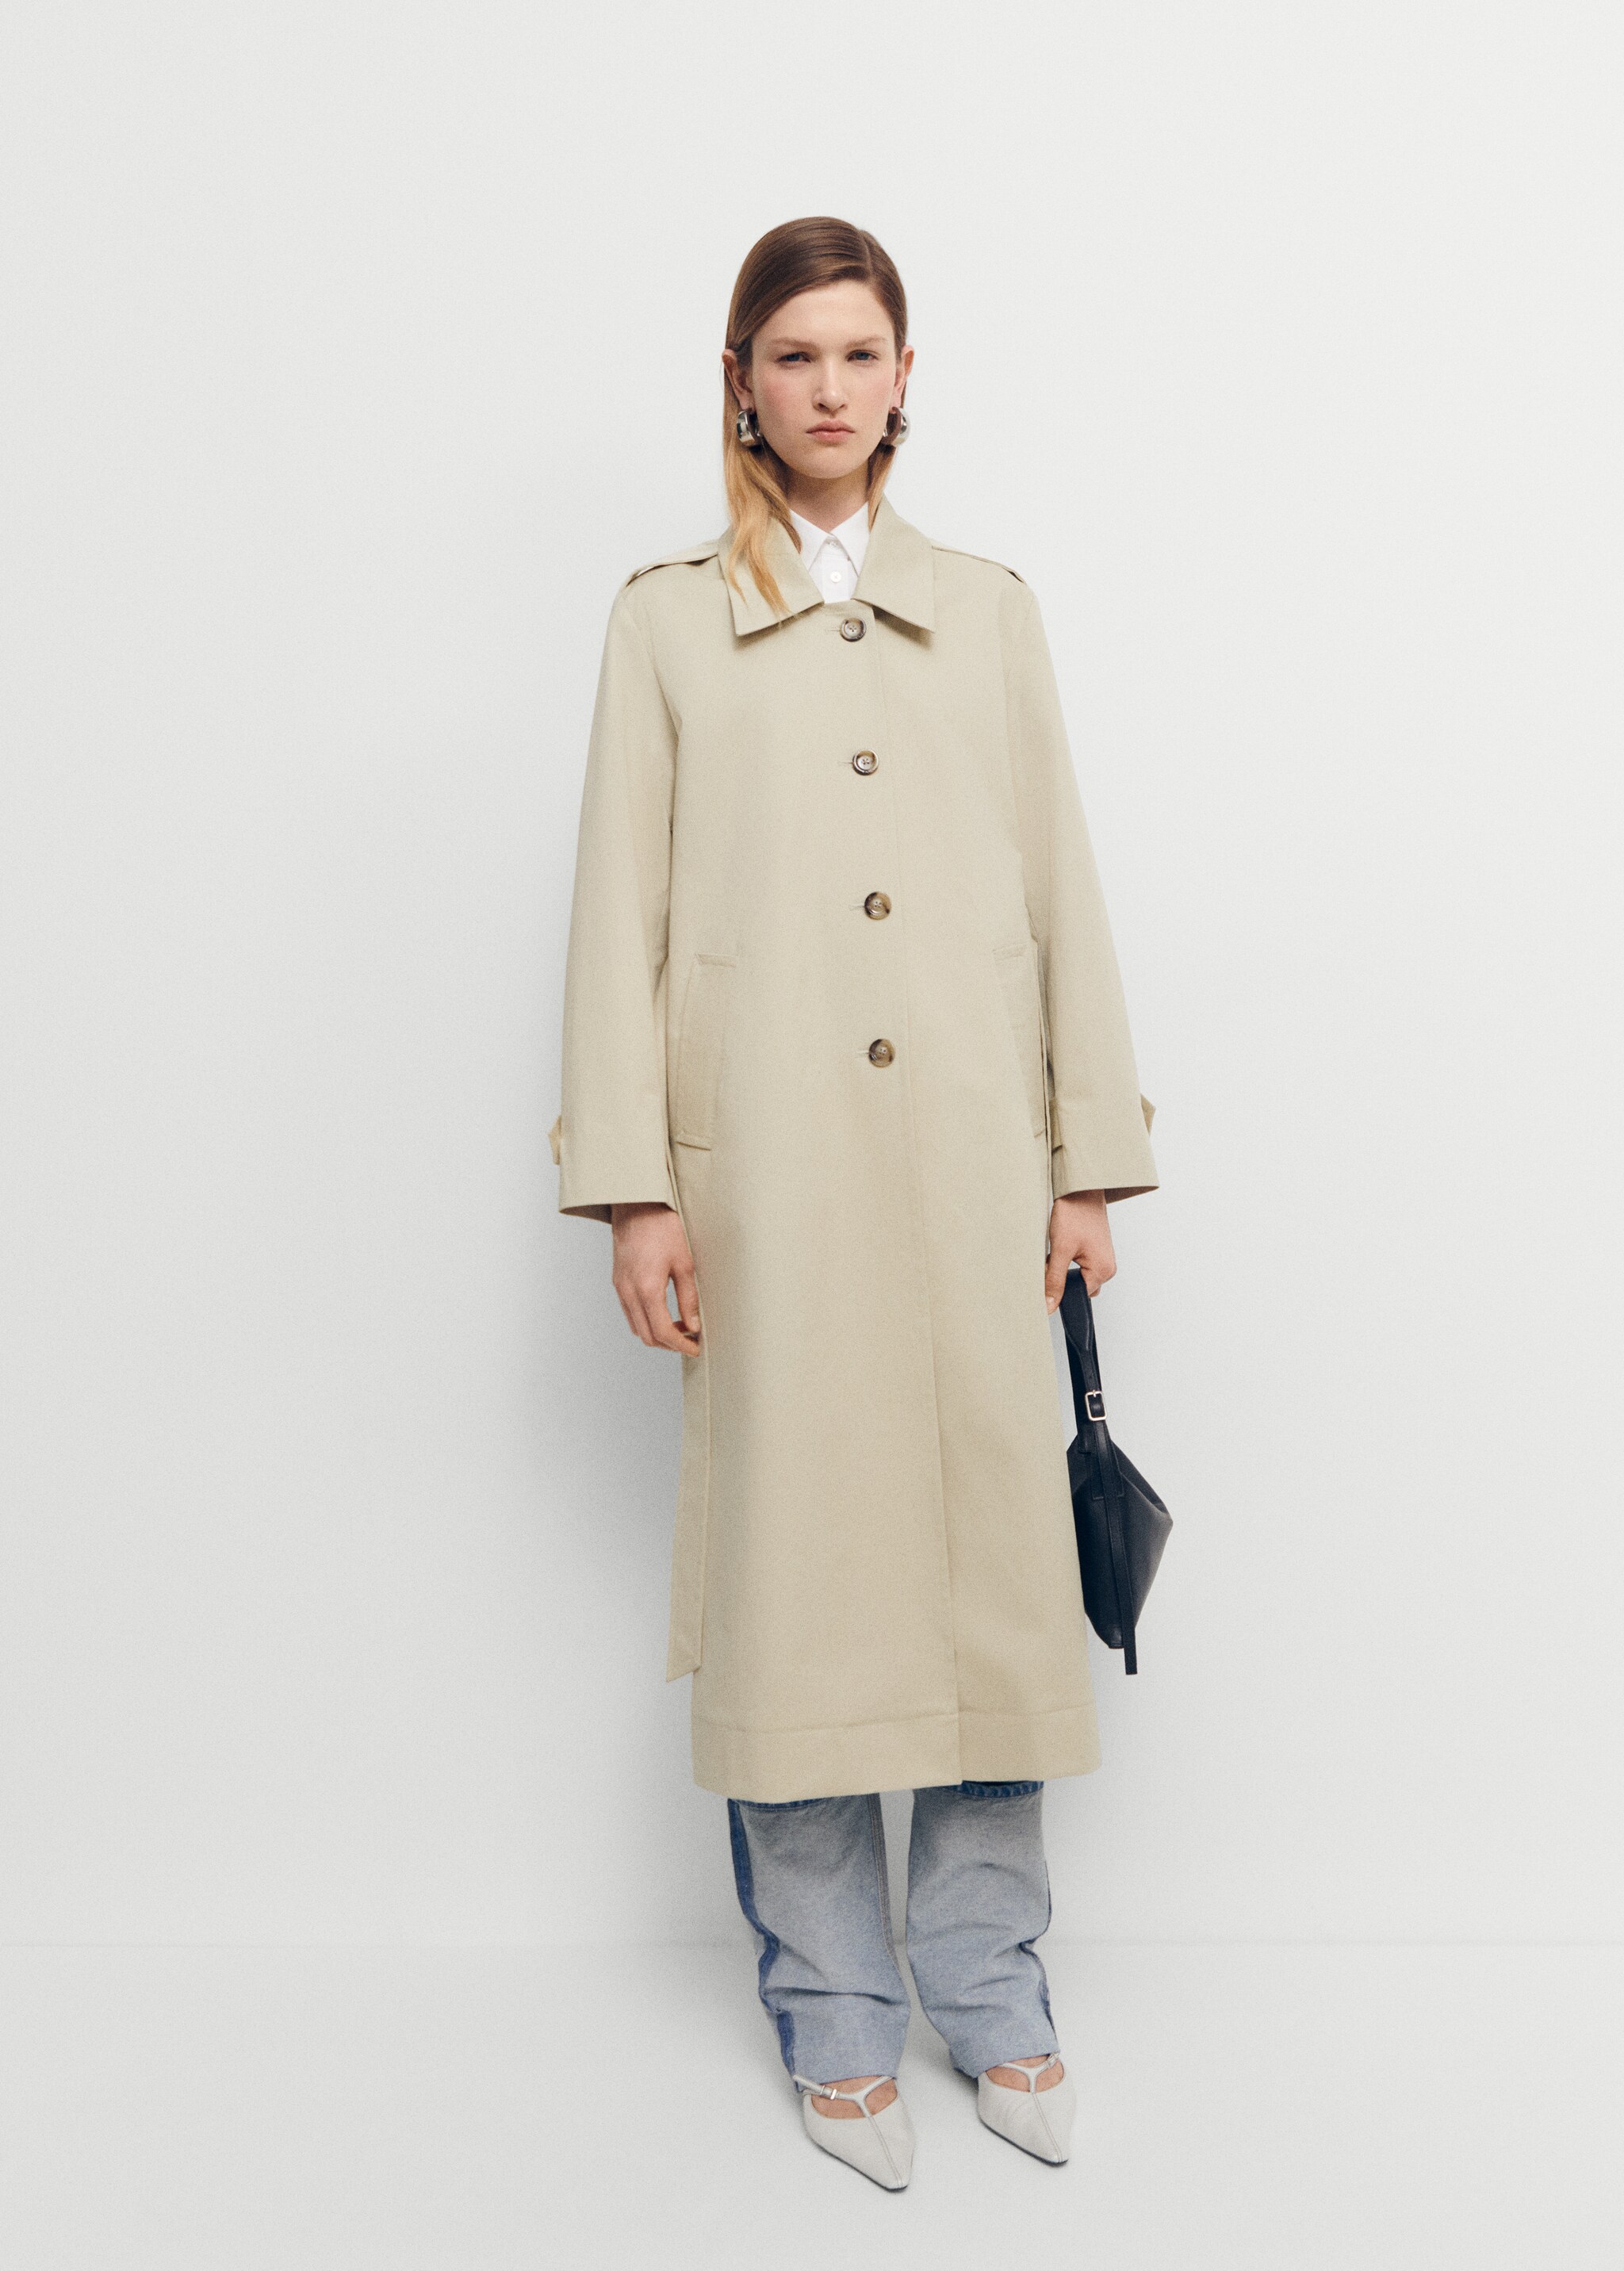 Cotton trench coat with shirt collar - General plane